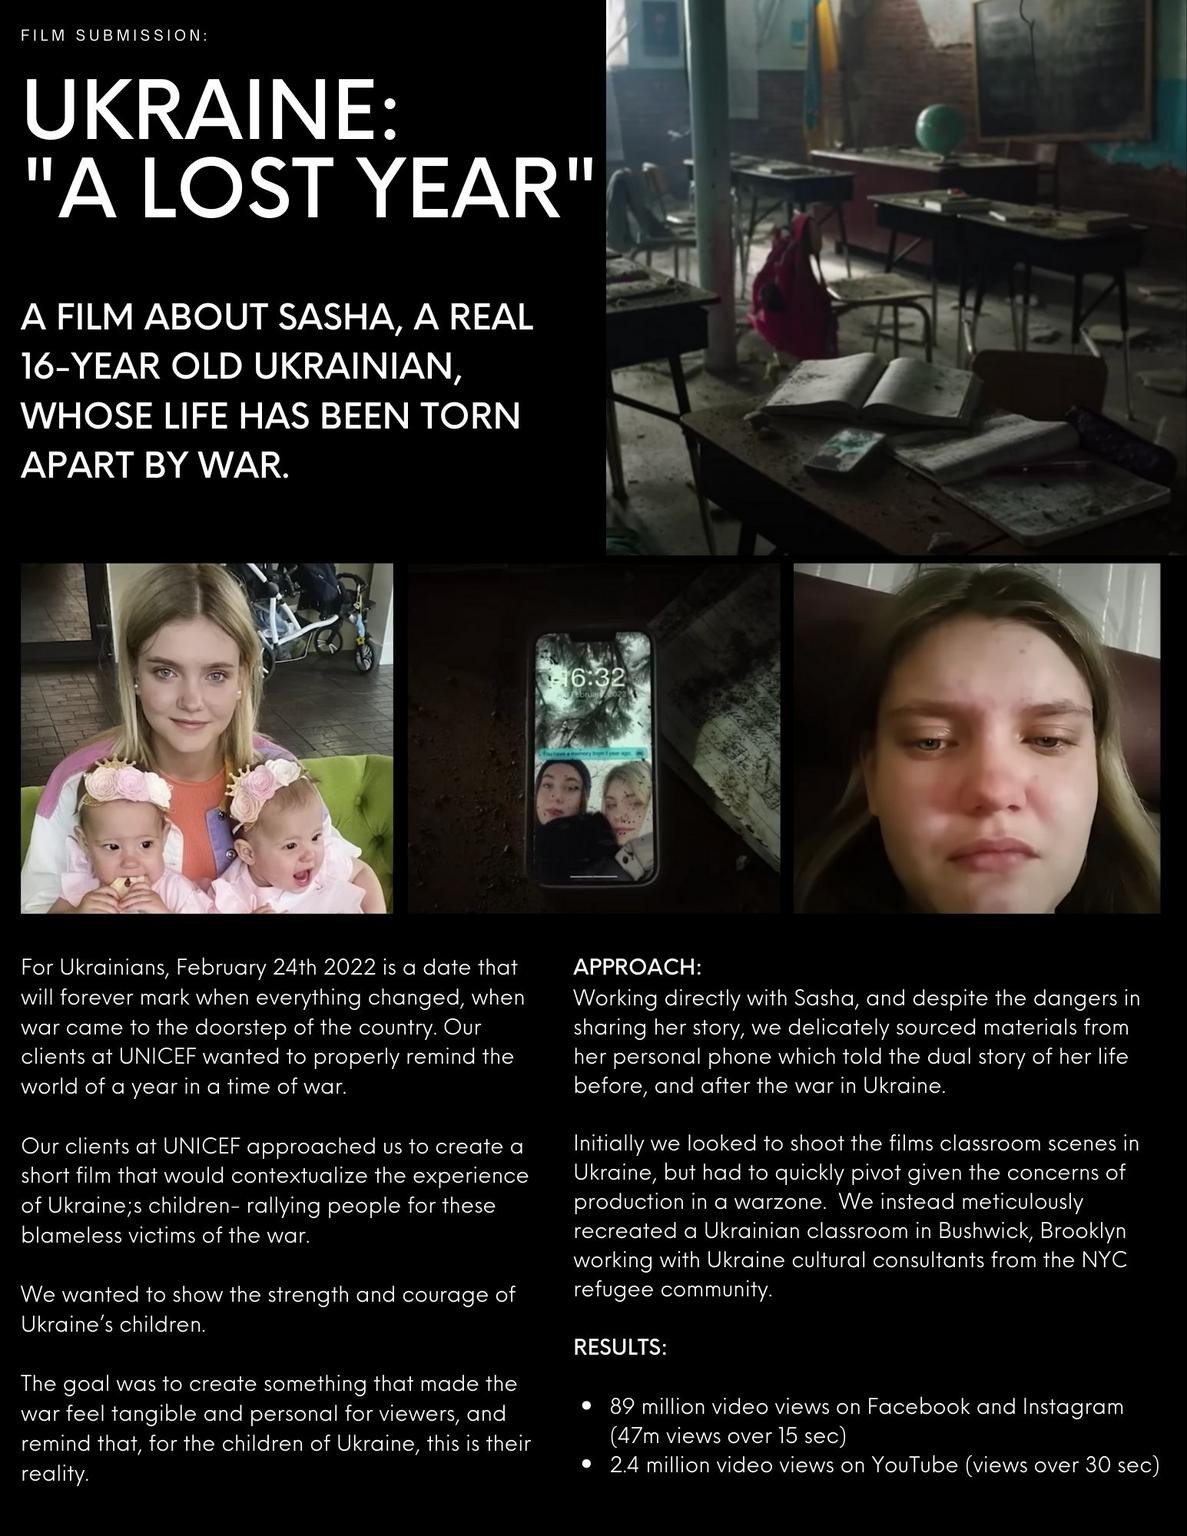 "A Lost Year"